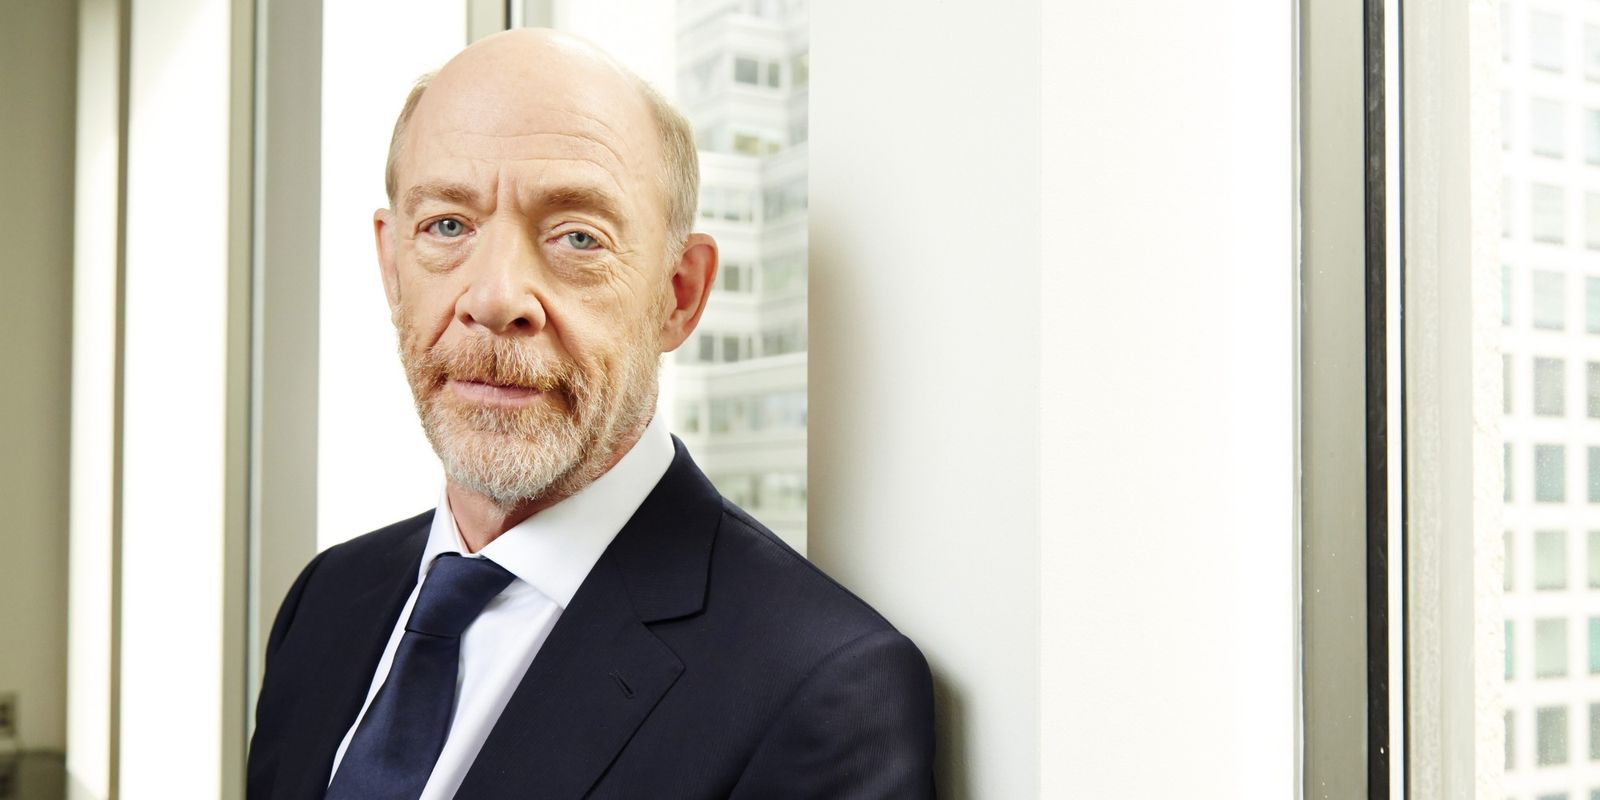 J.K. Simmons Will Develop His Own Commissioner Gordon